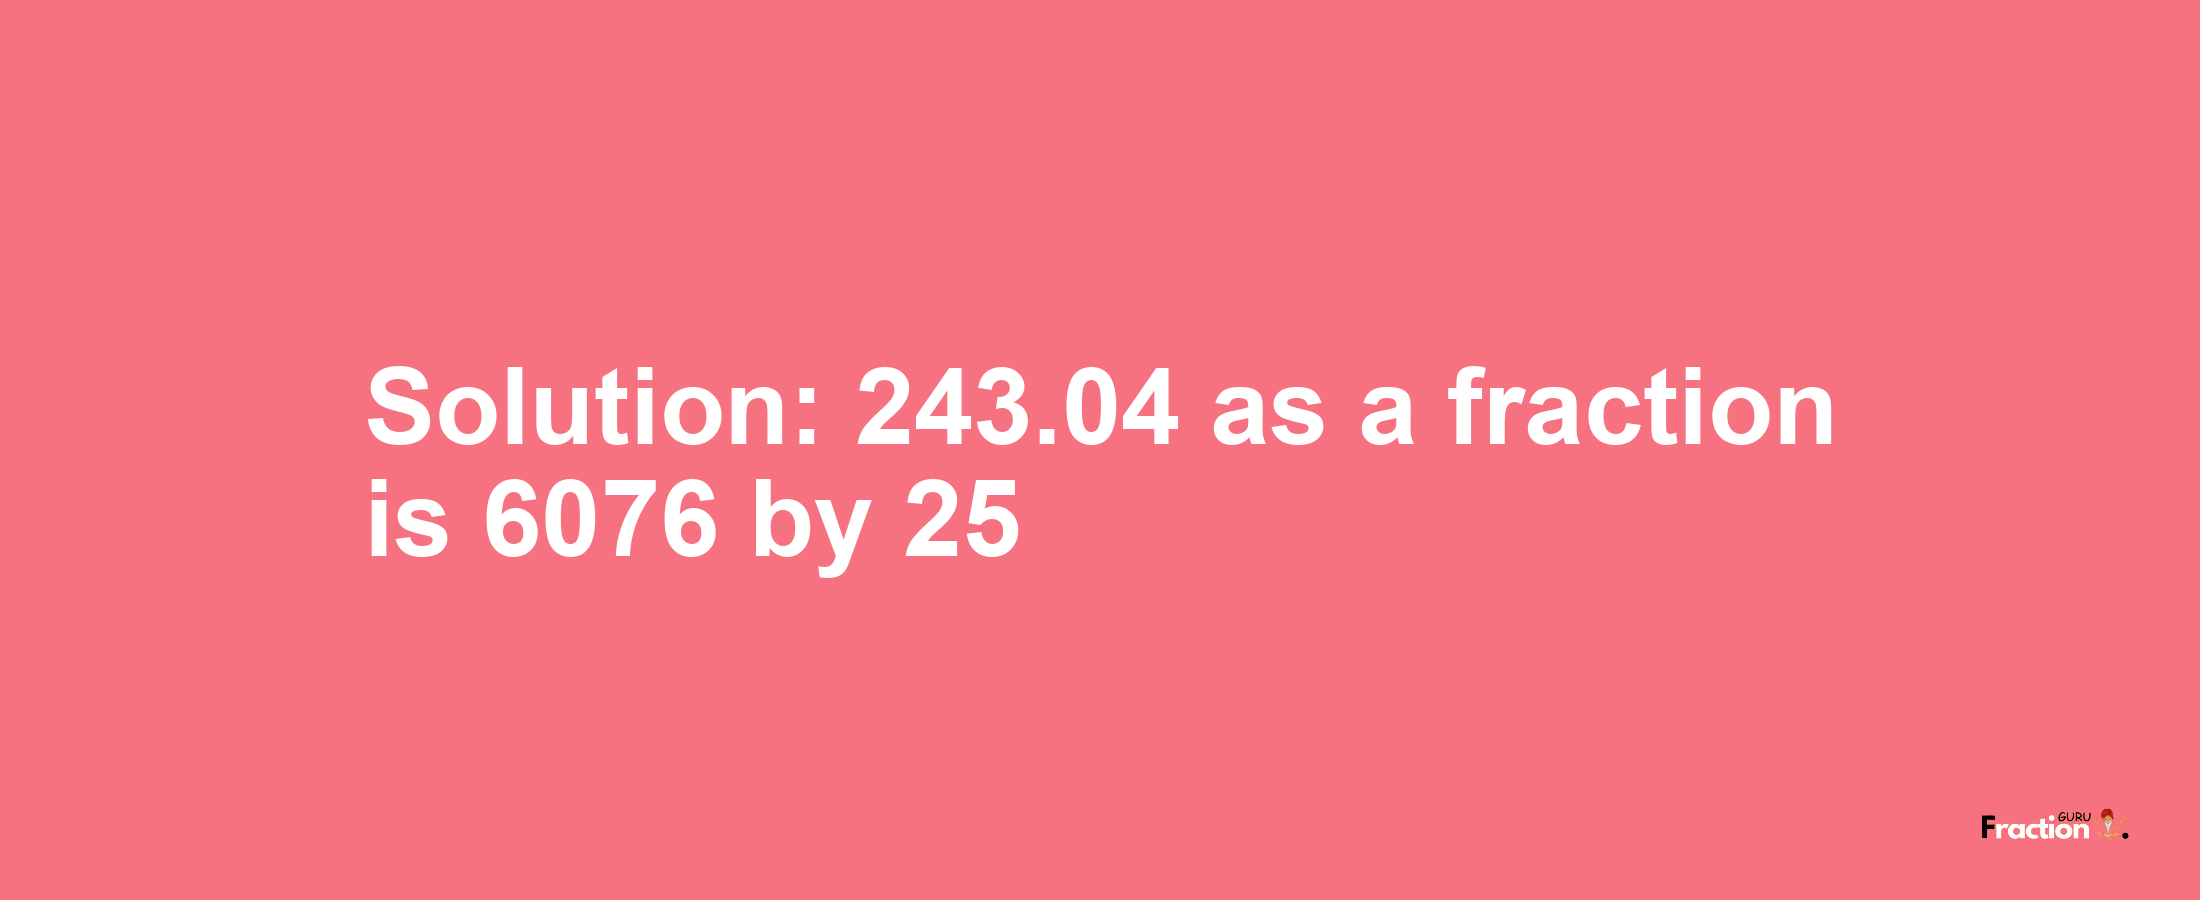 Solution:243.04 as a fraction is 6076/25